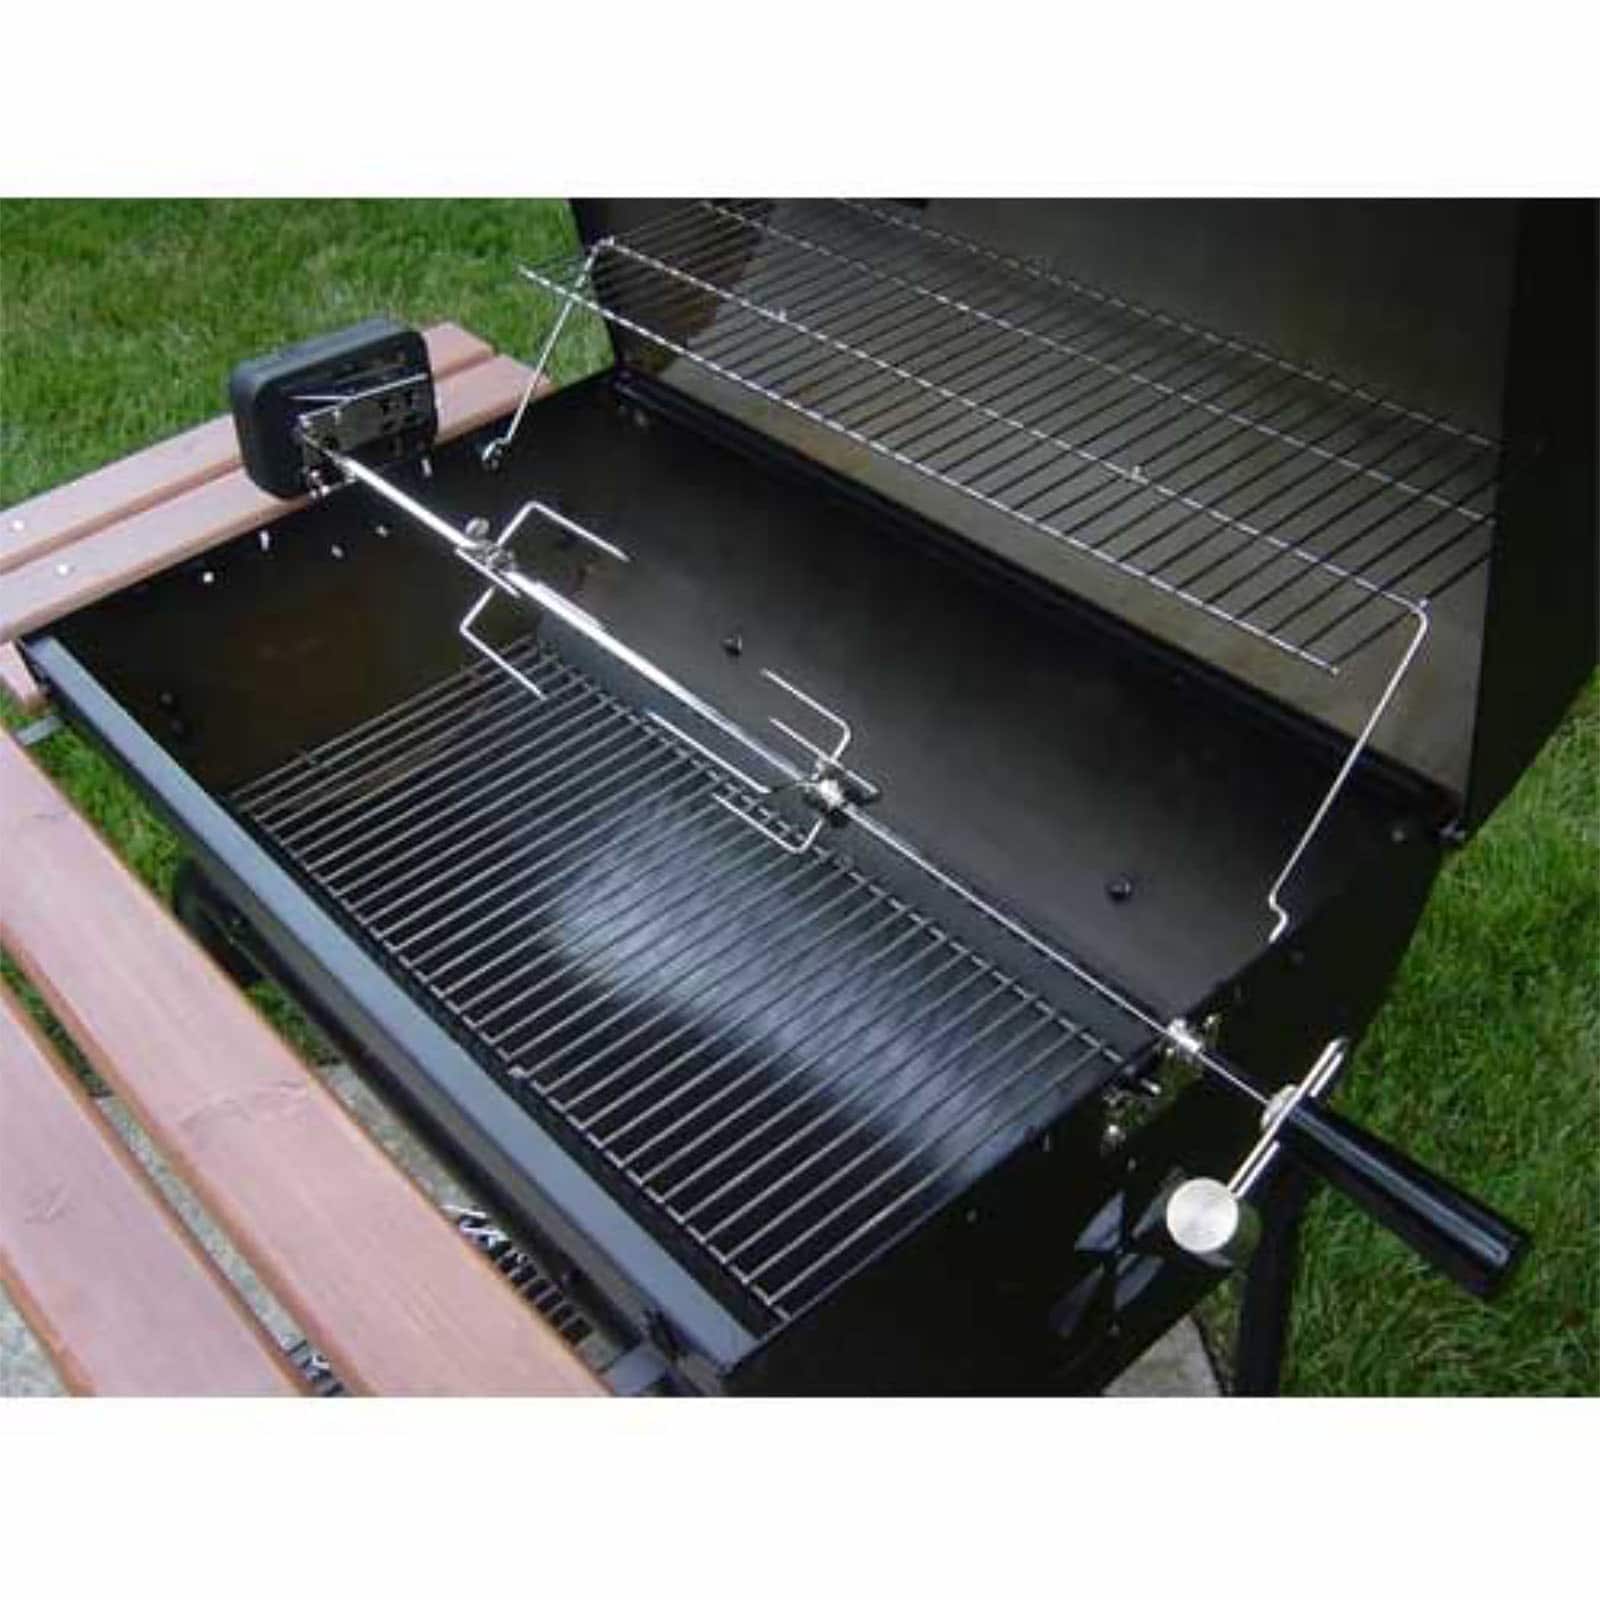 HARDT DUAL FUNCTION NATURAL GAS/ CHARCOAL COMMERCIAL ROTISSERIE MODEL BLAZE  (CAPACITY 40 CHICKENS) - OBR Equipment